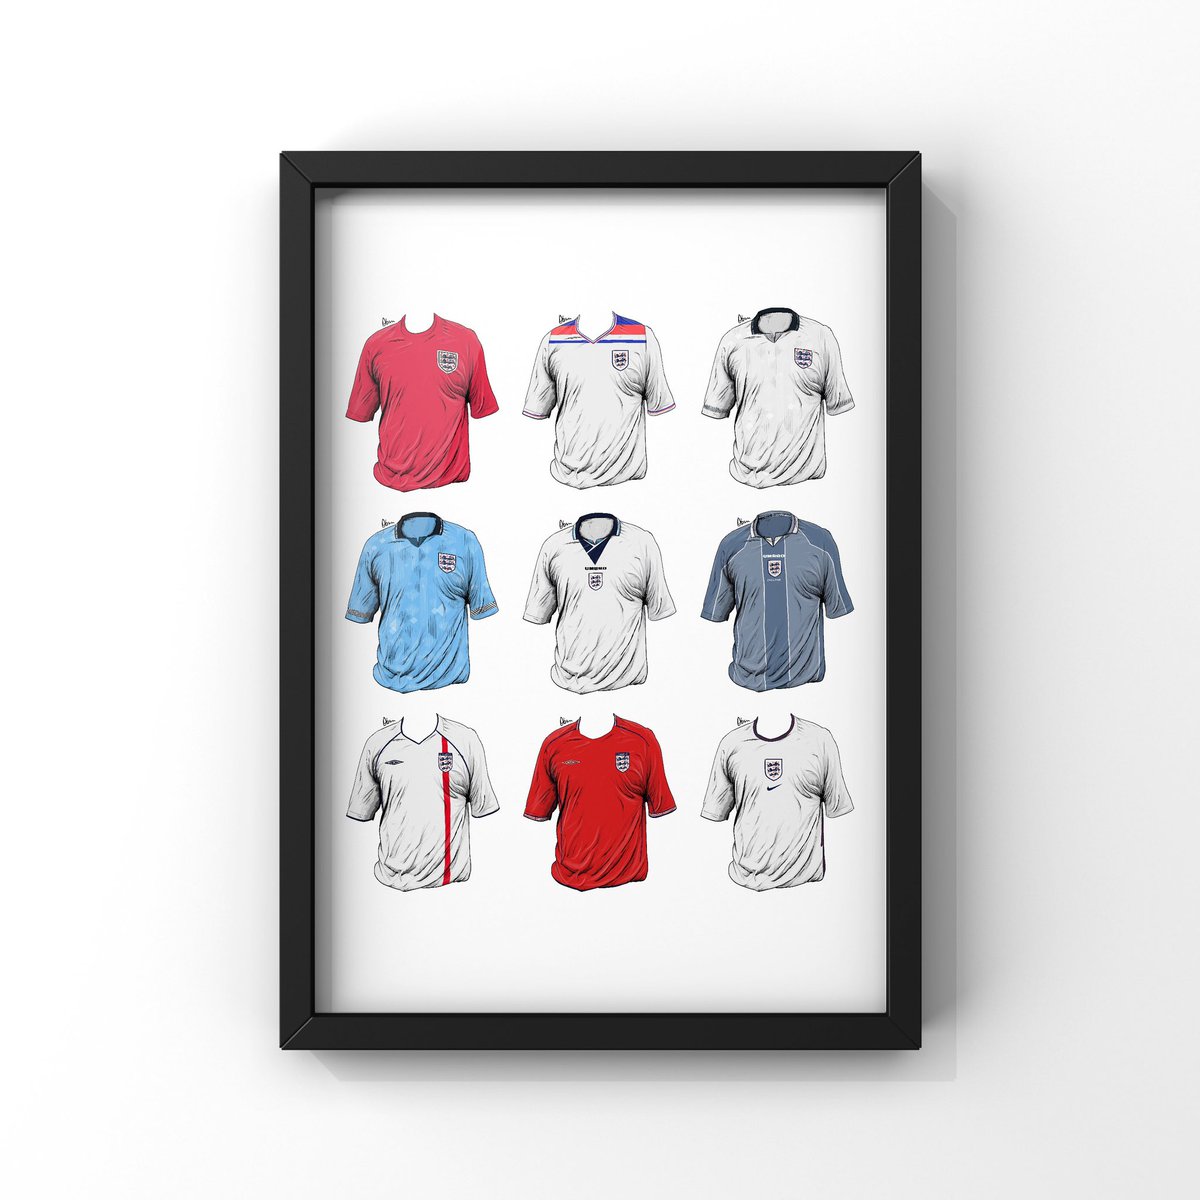 Absolutely loving these kit prints. Available now through Dbsnstudio.com

#manchesterunited #mufc #evertonfc #efc #england #retrofootballkits